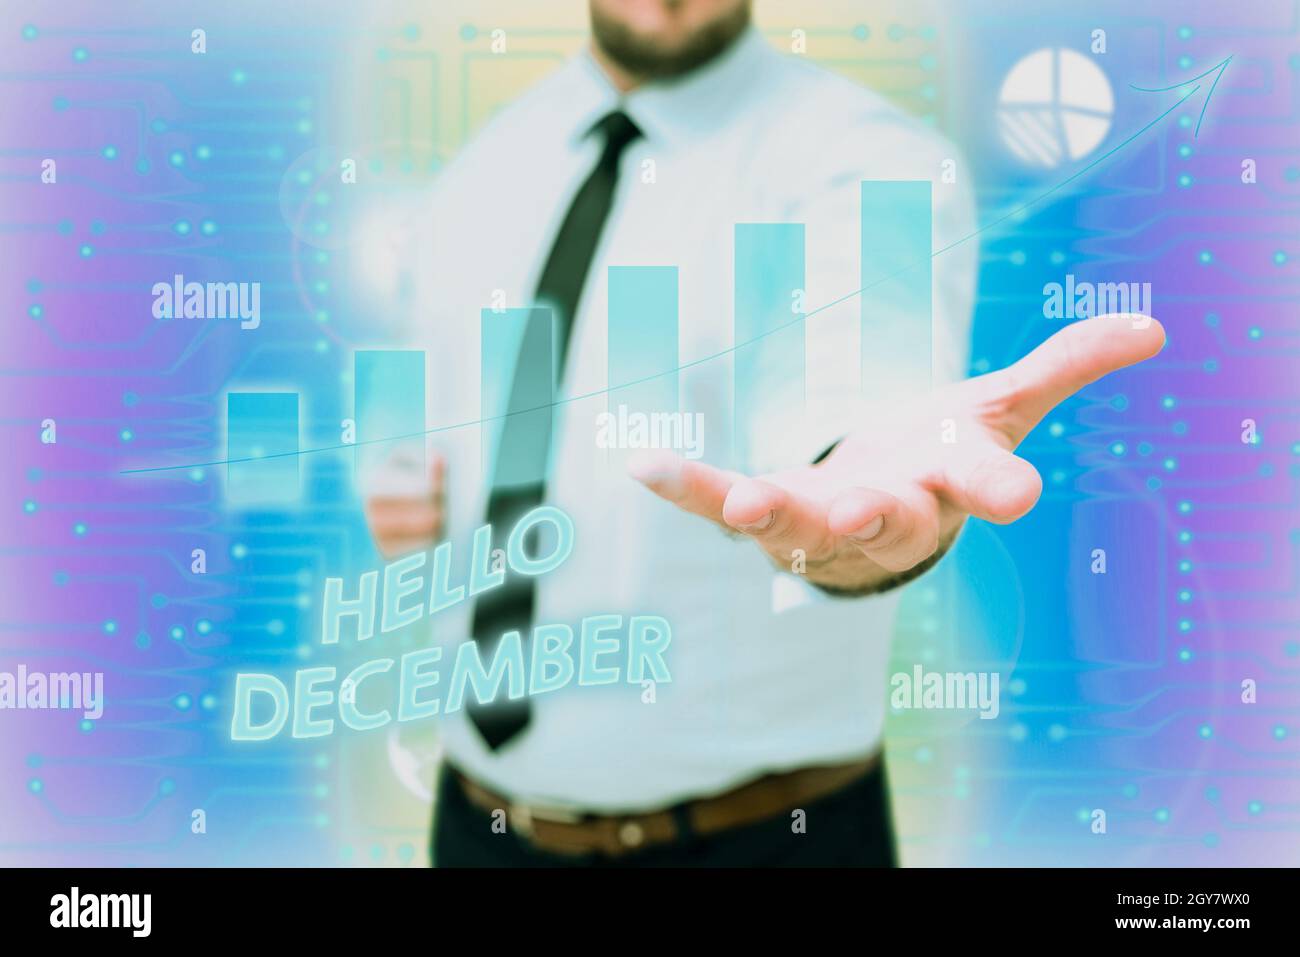 Sign displaying Hello December, Concept meaning greeting used when welcoming the twelfth month of the year Gentelman Uniform Standing Holding New Futu Stock Photo